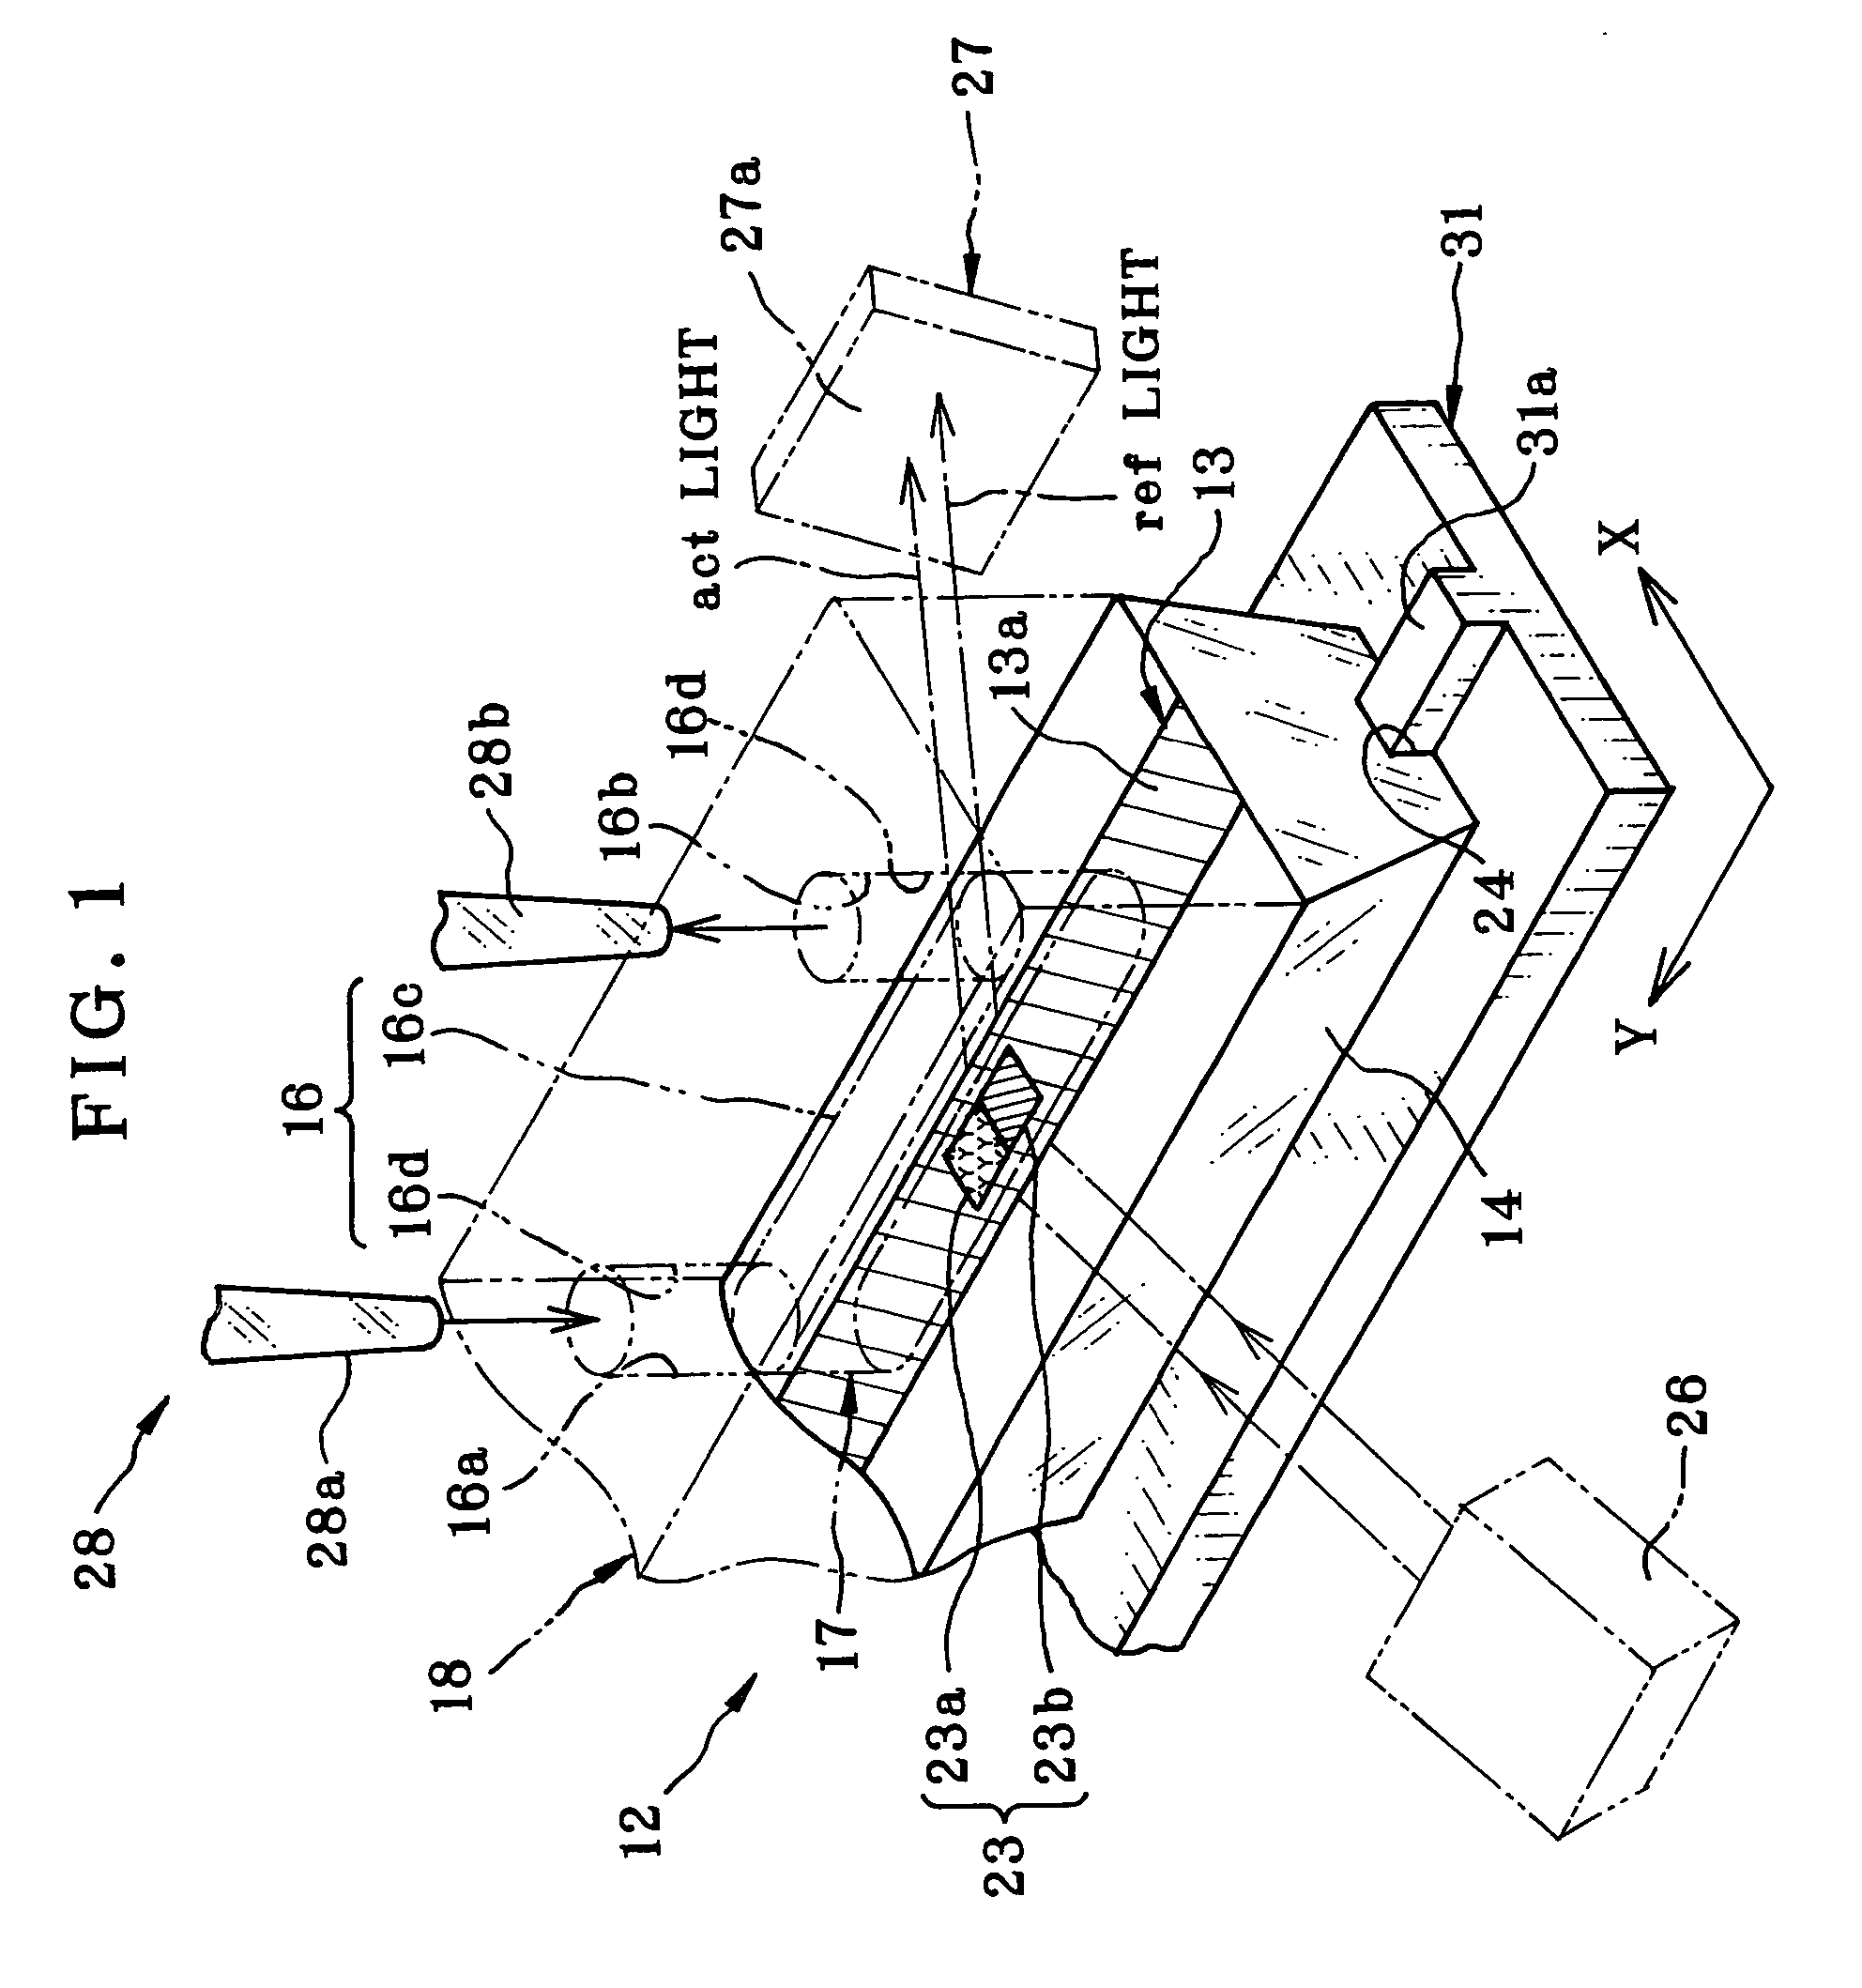 Method and apparatus for assay in utilizing attenuated total reflection